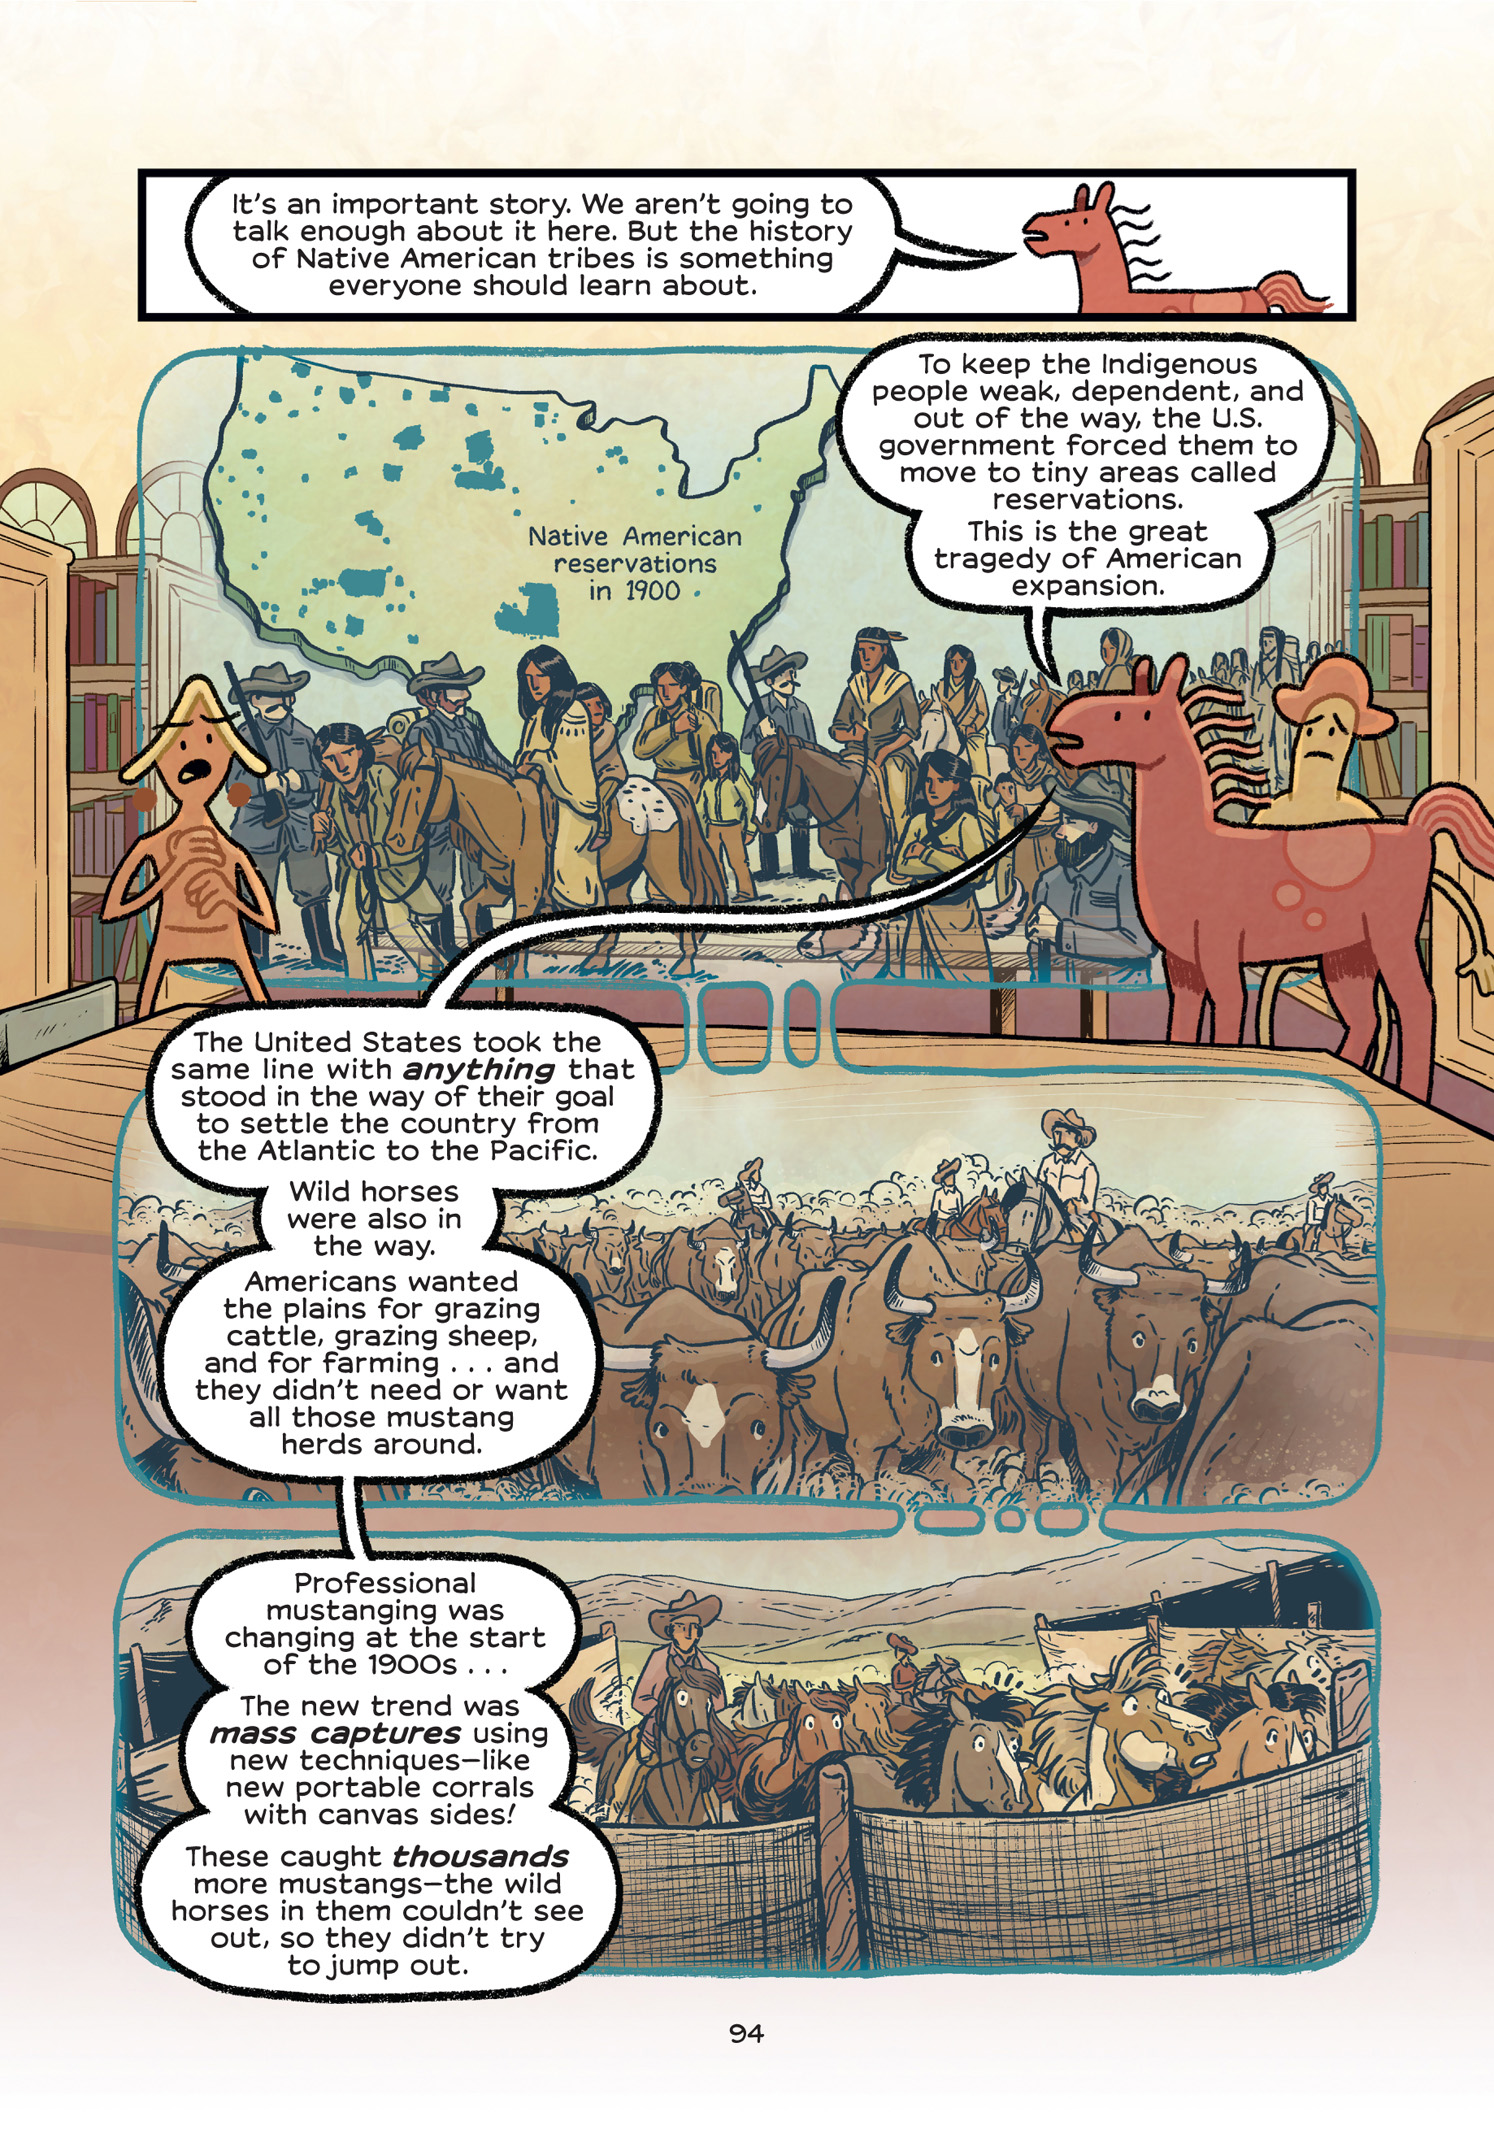 Read online History Comics comic -  Issue # The Wild Mustang - Horses of the American West - 89